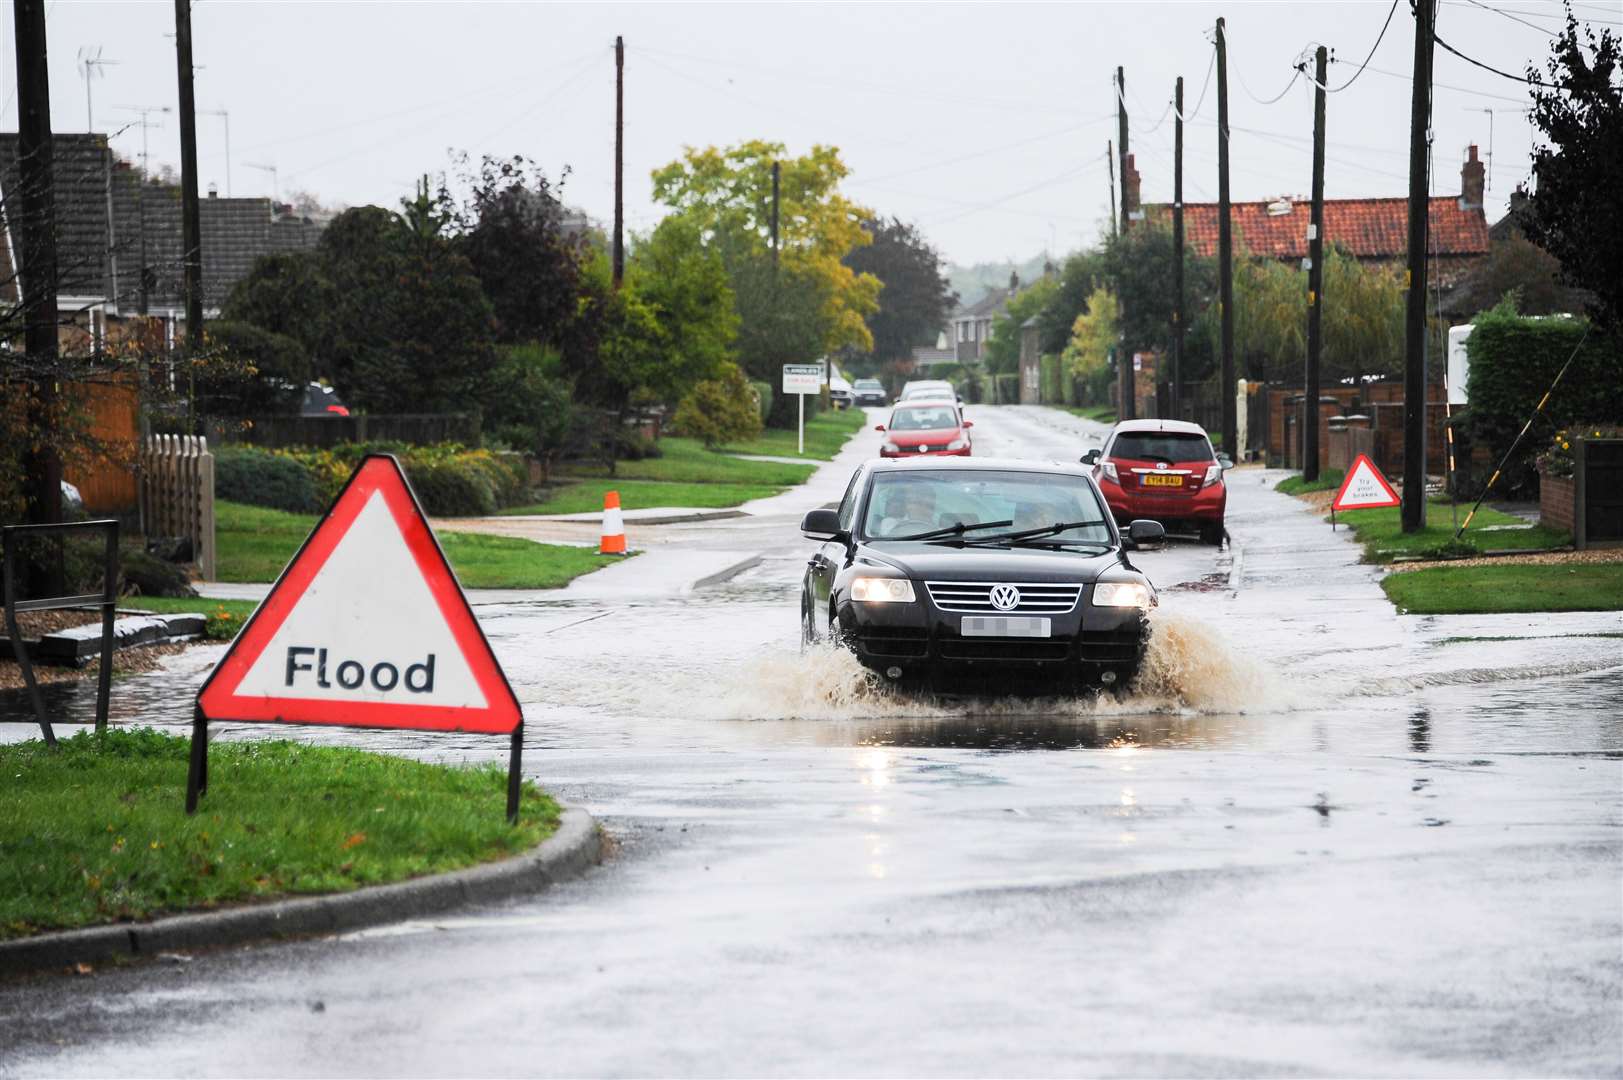 A vehicle makes its way through heavy flooding